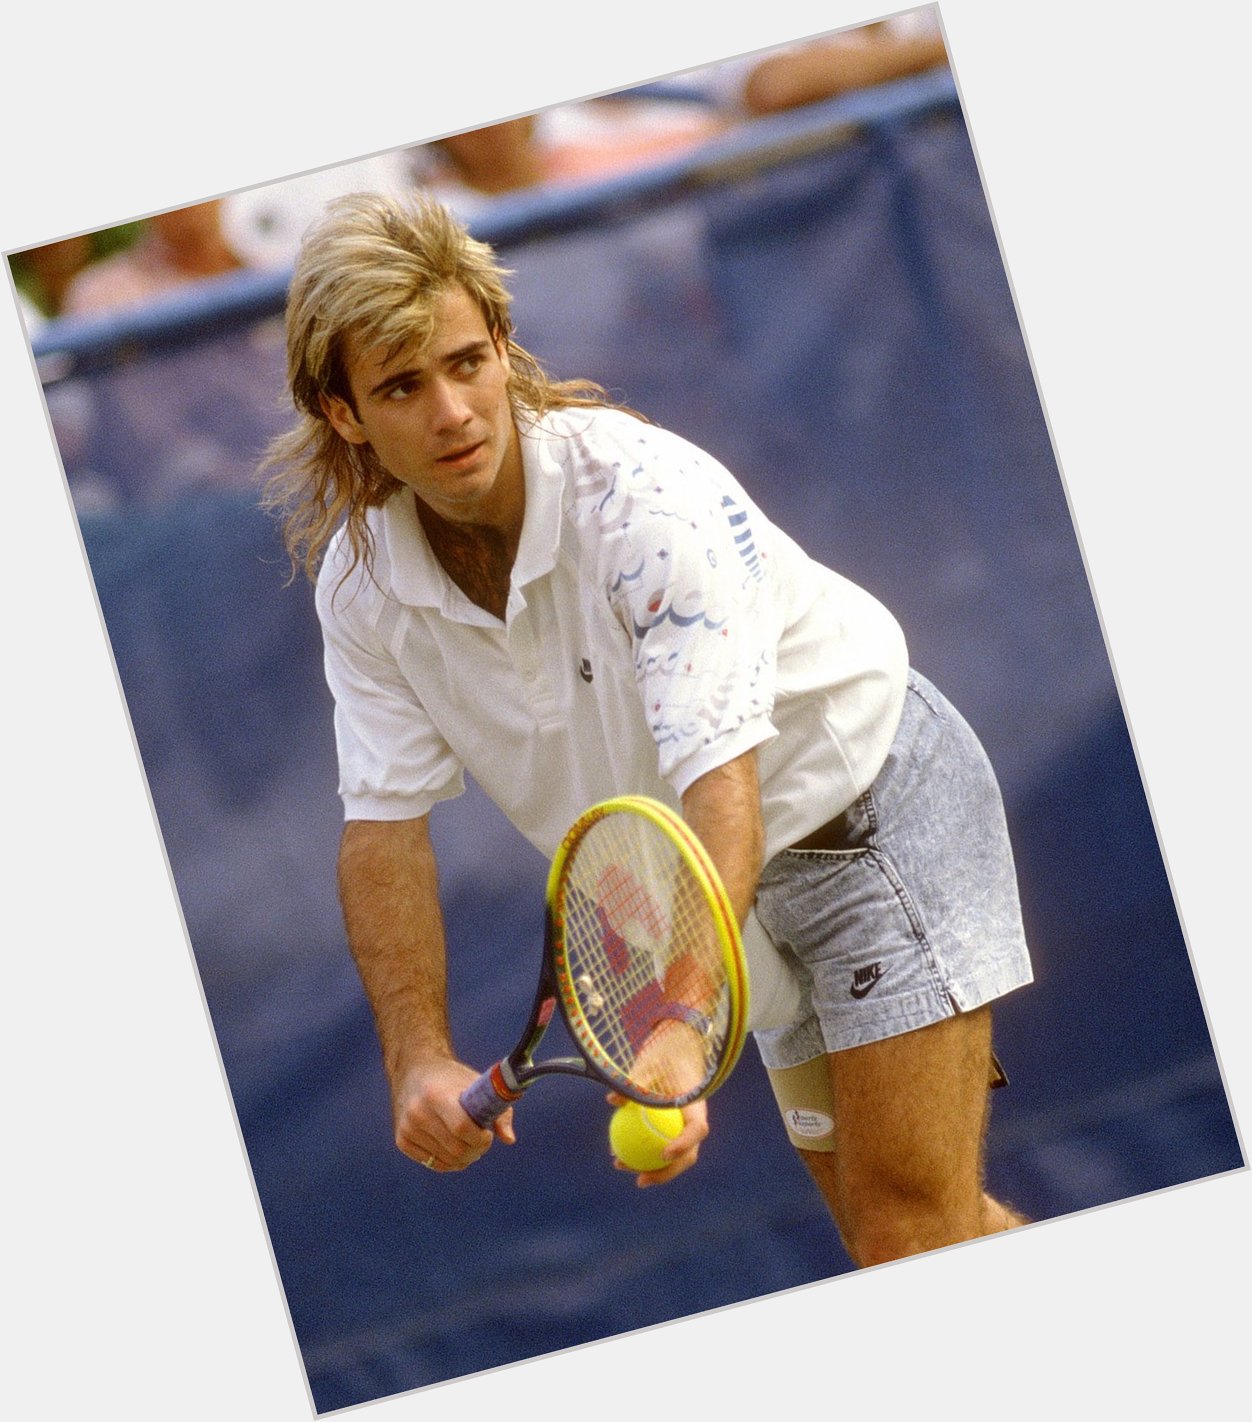 Happy Birthday American tennis player Andre Agassi, now 51 years old. 